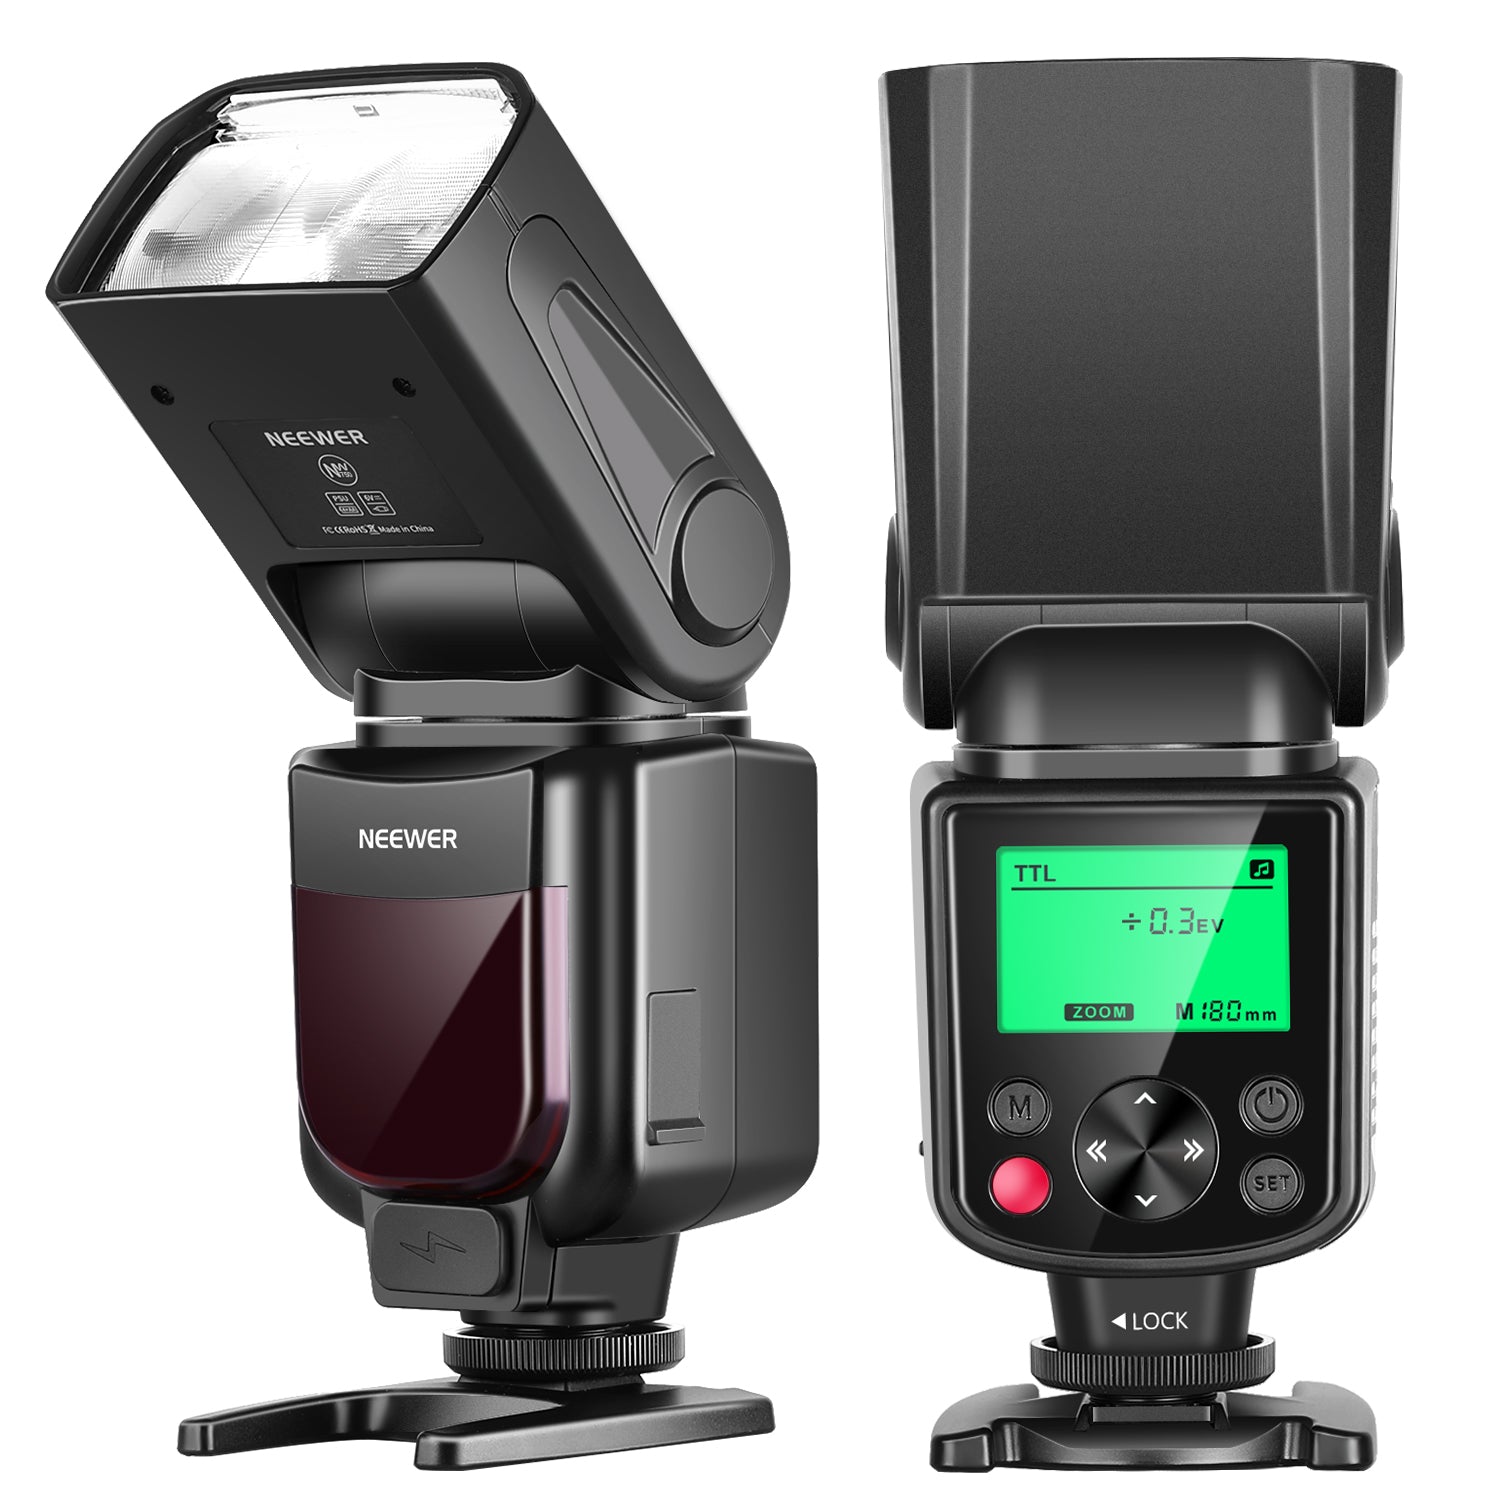 Godox V860III-N Camera Flash Speedlite Compatible for Nikon Camera, TTL  On-Camera Flash Speedlight with Rechargeable Battery, 2.4G 1/8000s  High-Speed